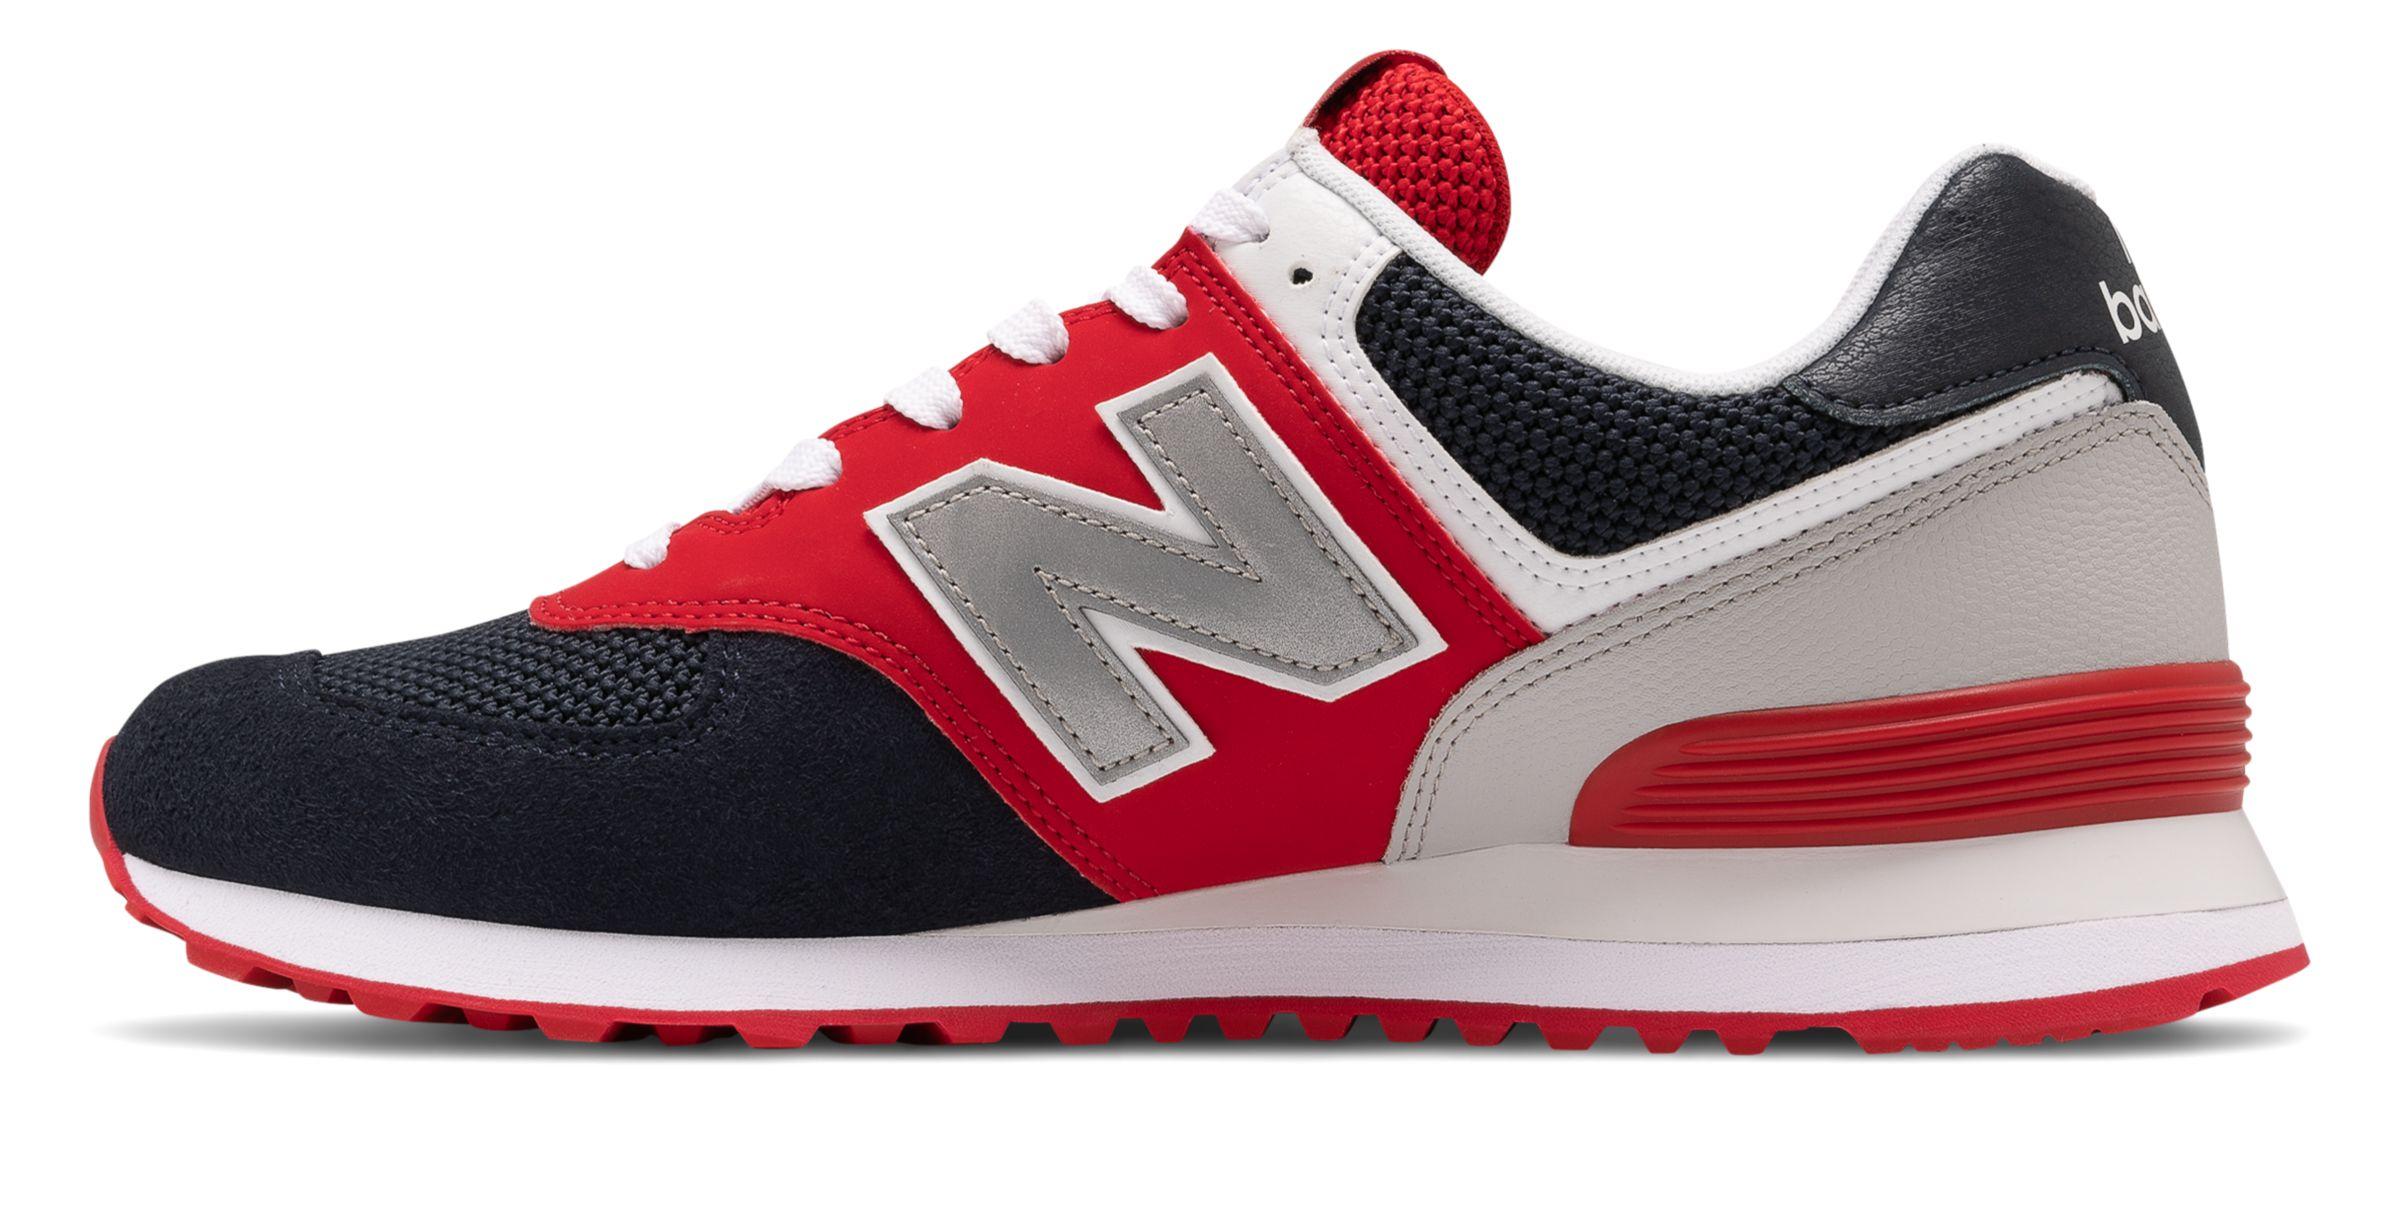 New Balance 574 Running Classics Shoes in Black/Red (Red) for Men - Lyst